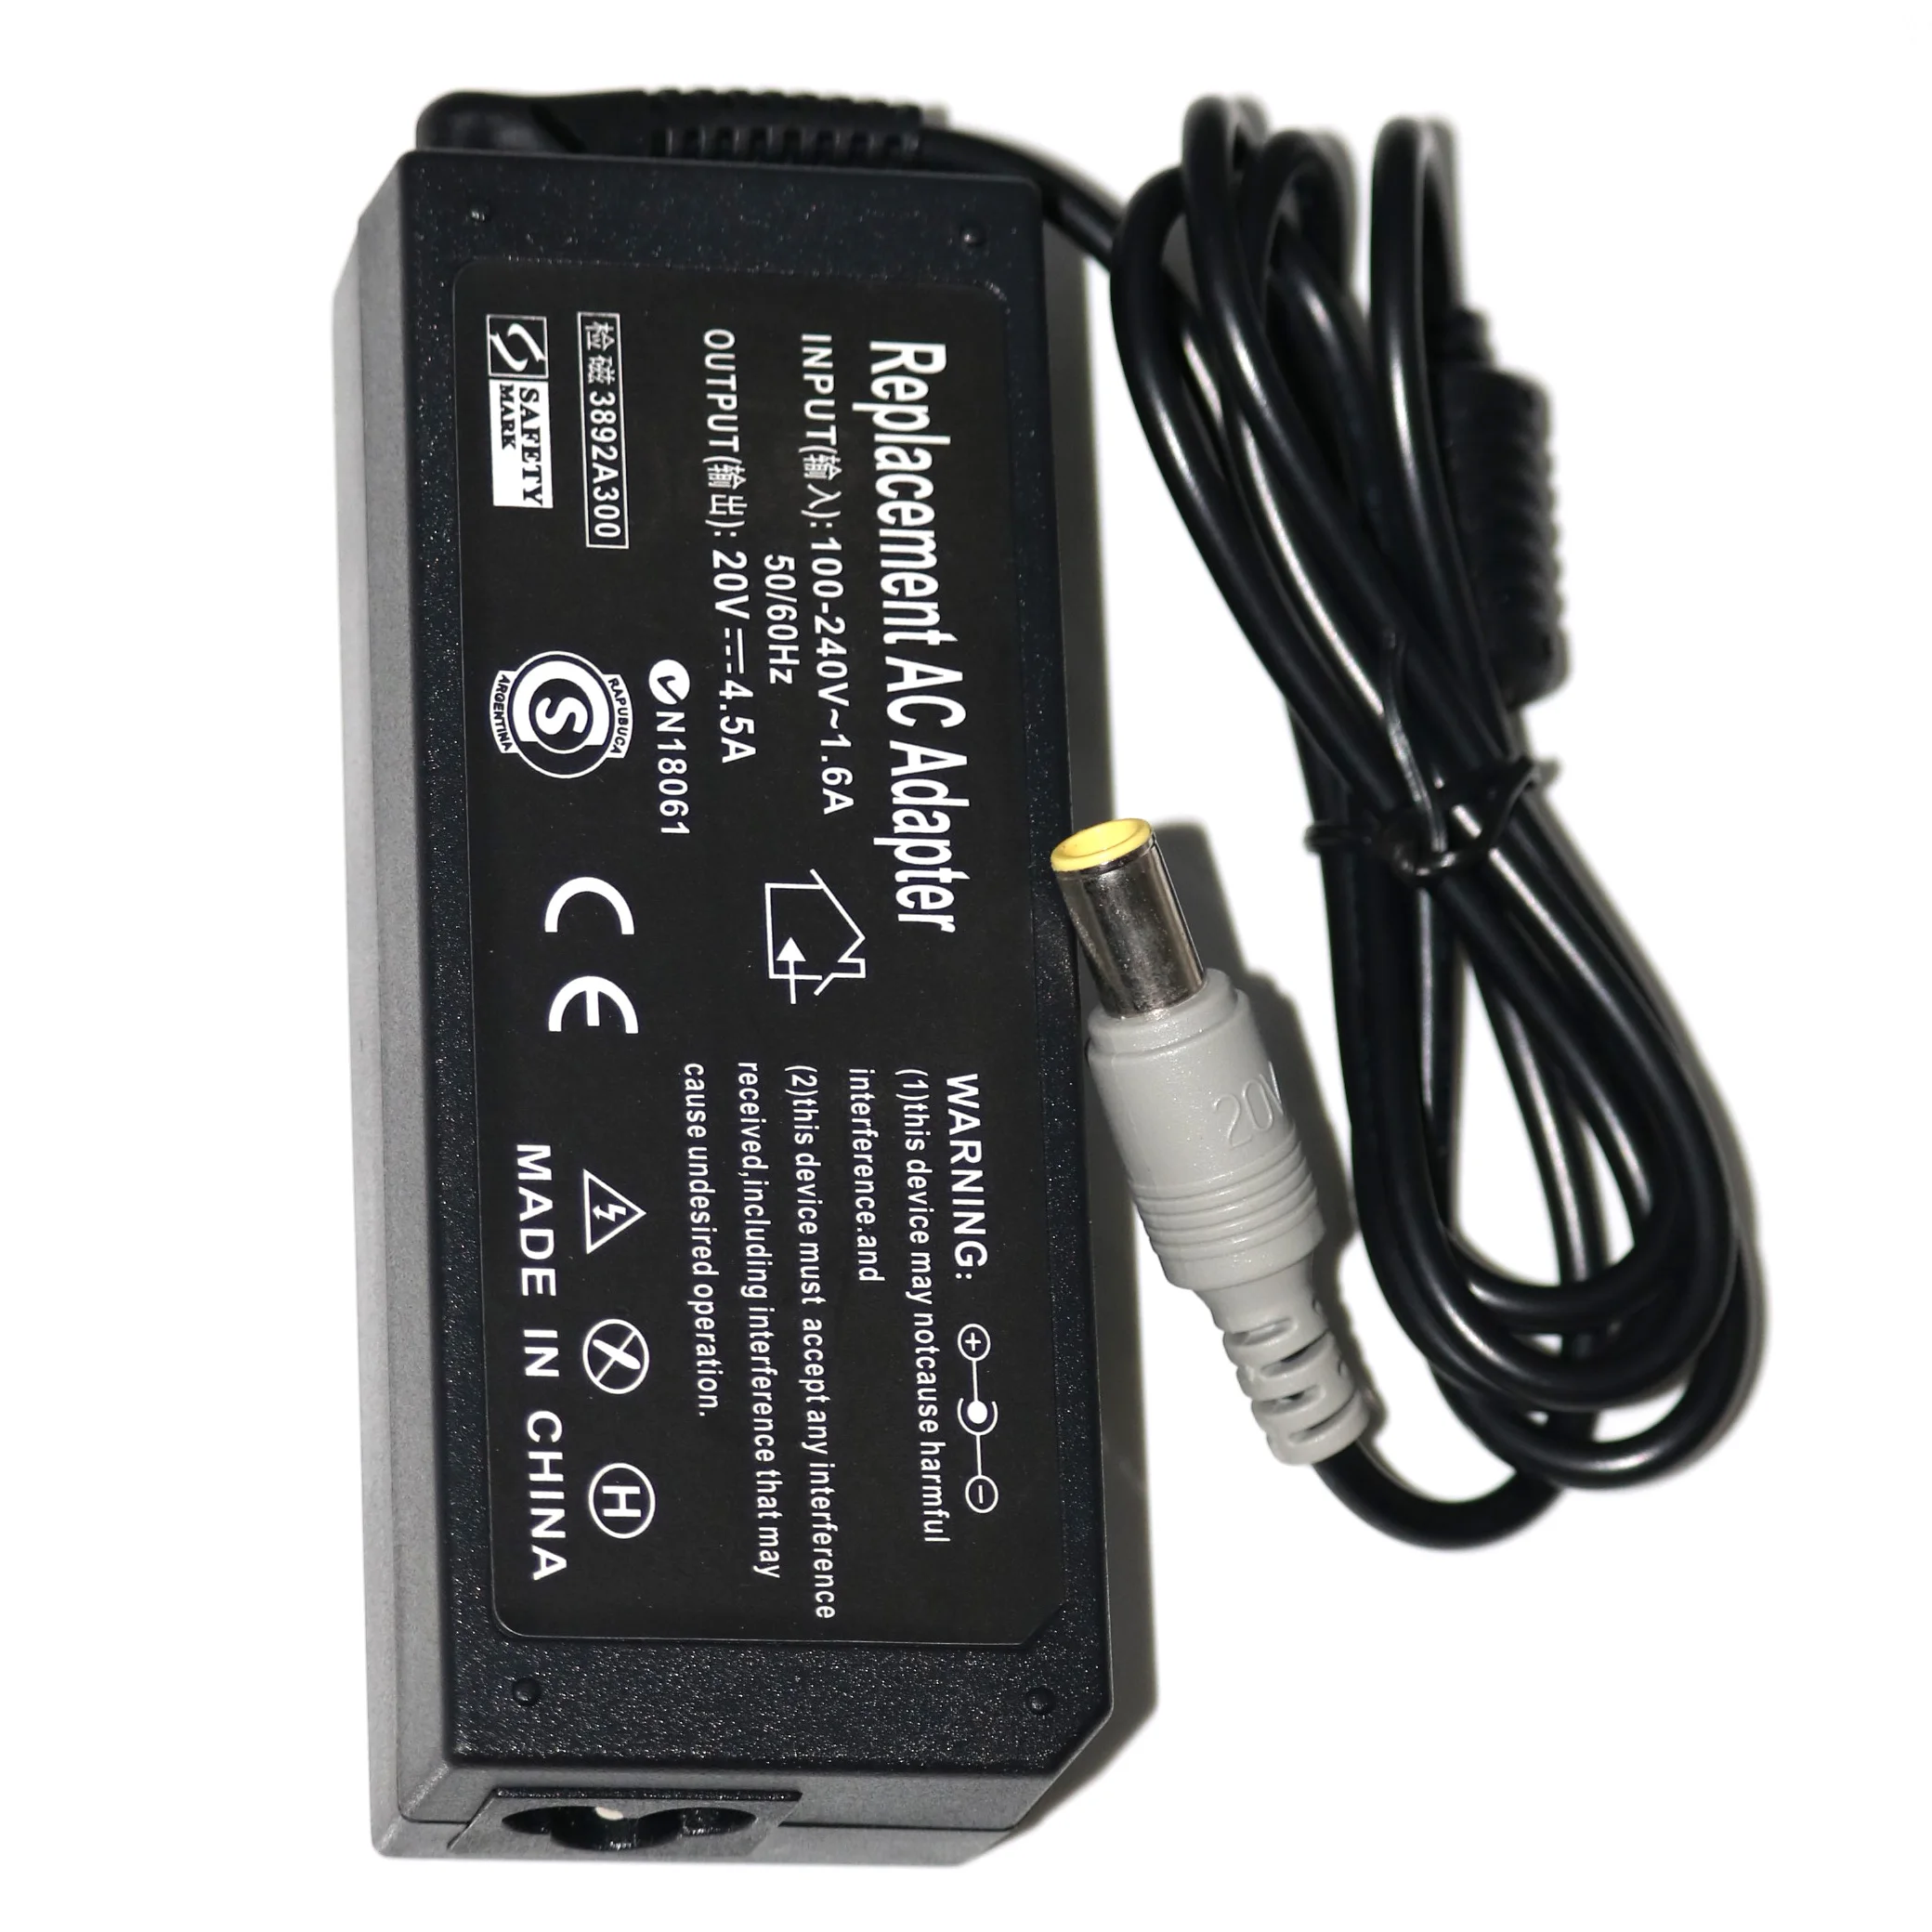 

AC Adapter 20V 4.5A 90W 7.9x5.0mm Power Supply Battery Charger for IBM For Lenovo for Thinkpad X61 T61 R61 92P 40Y High Quality